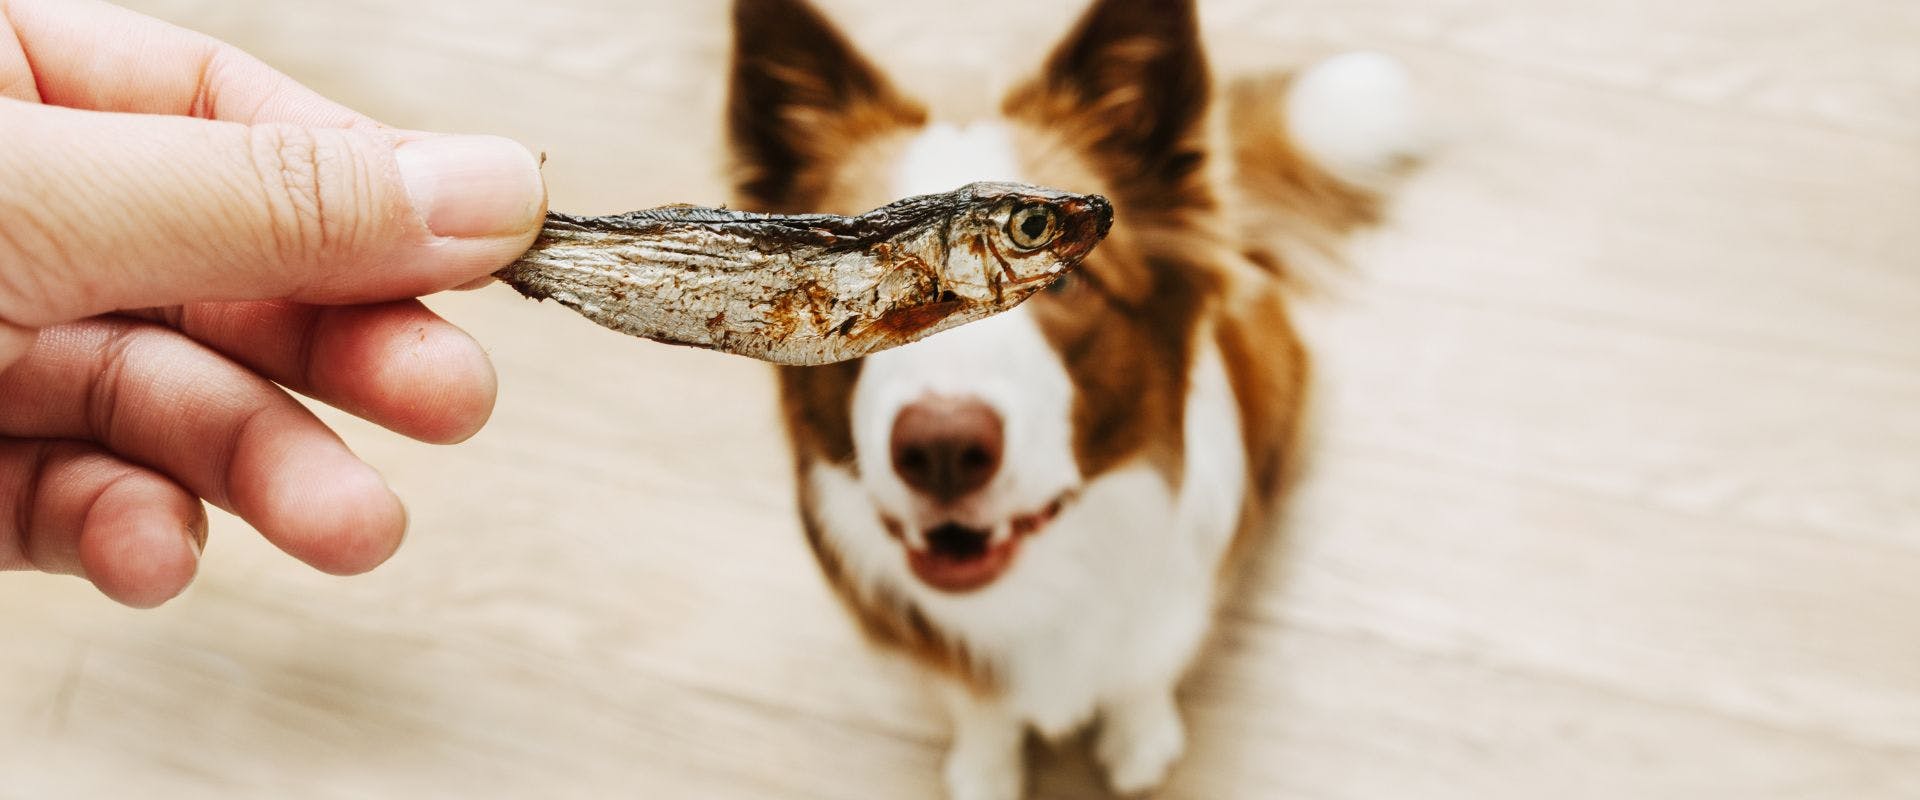 Dried anchovy being held in front of a brown and white Border Collie dog